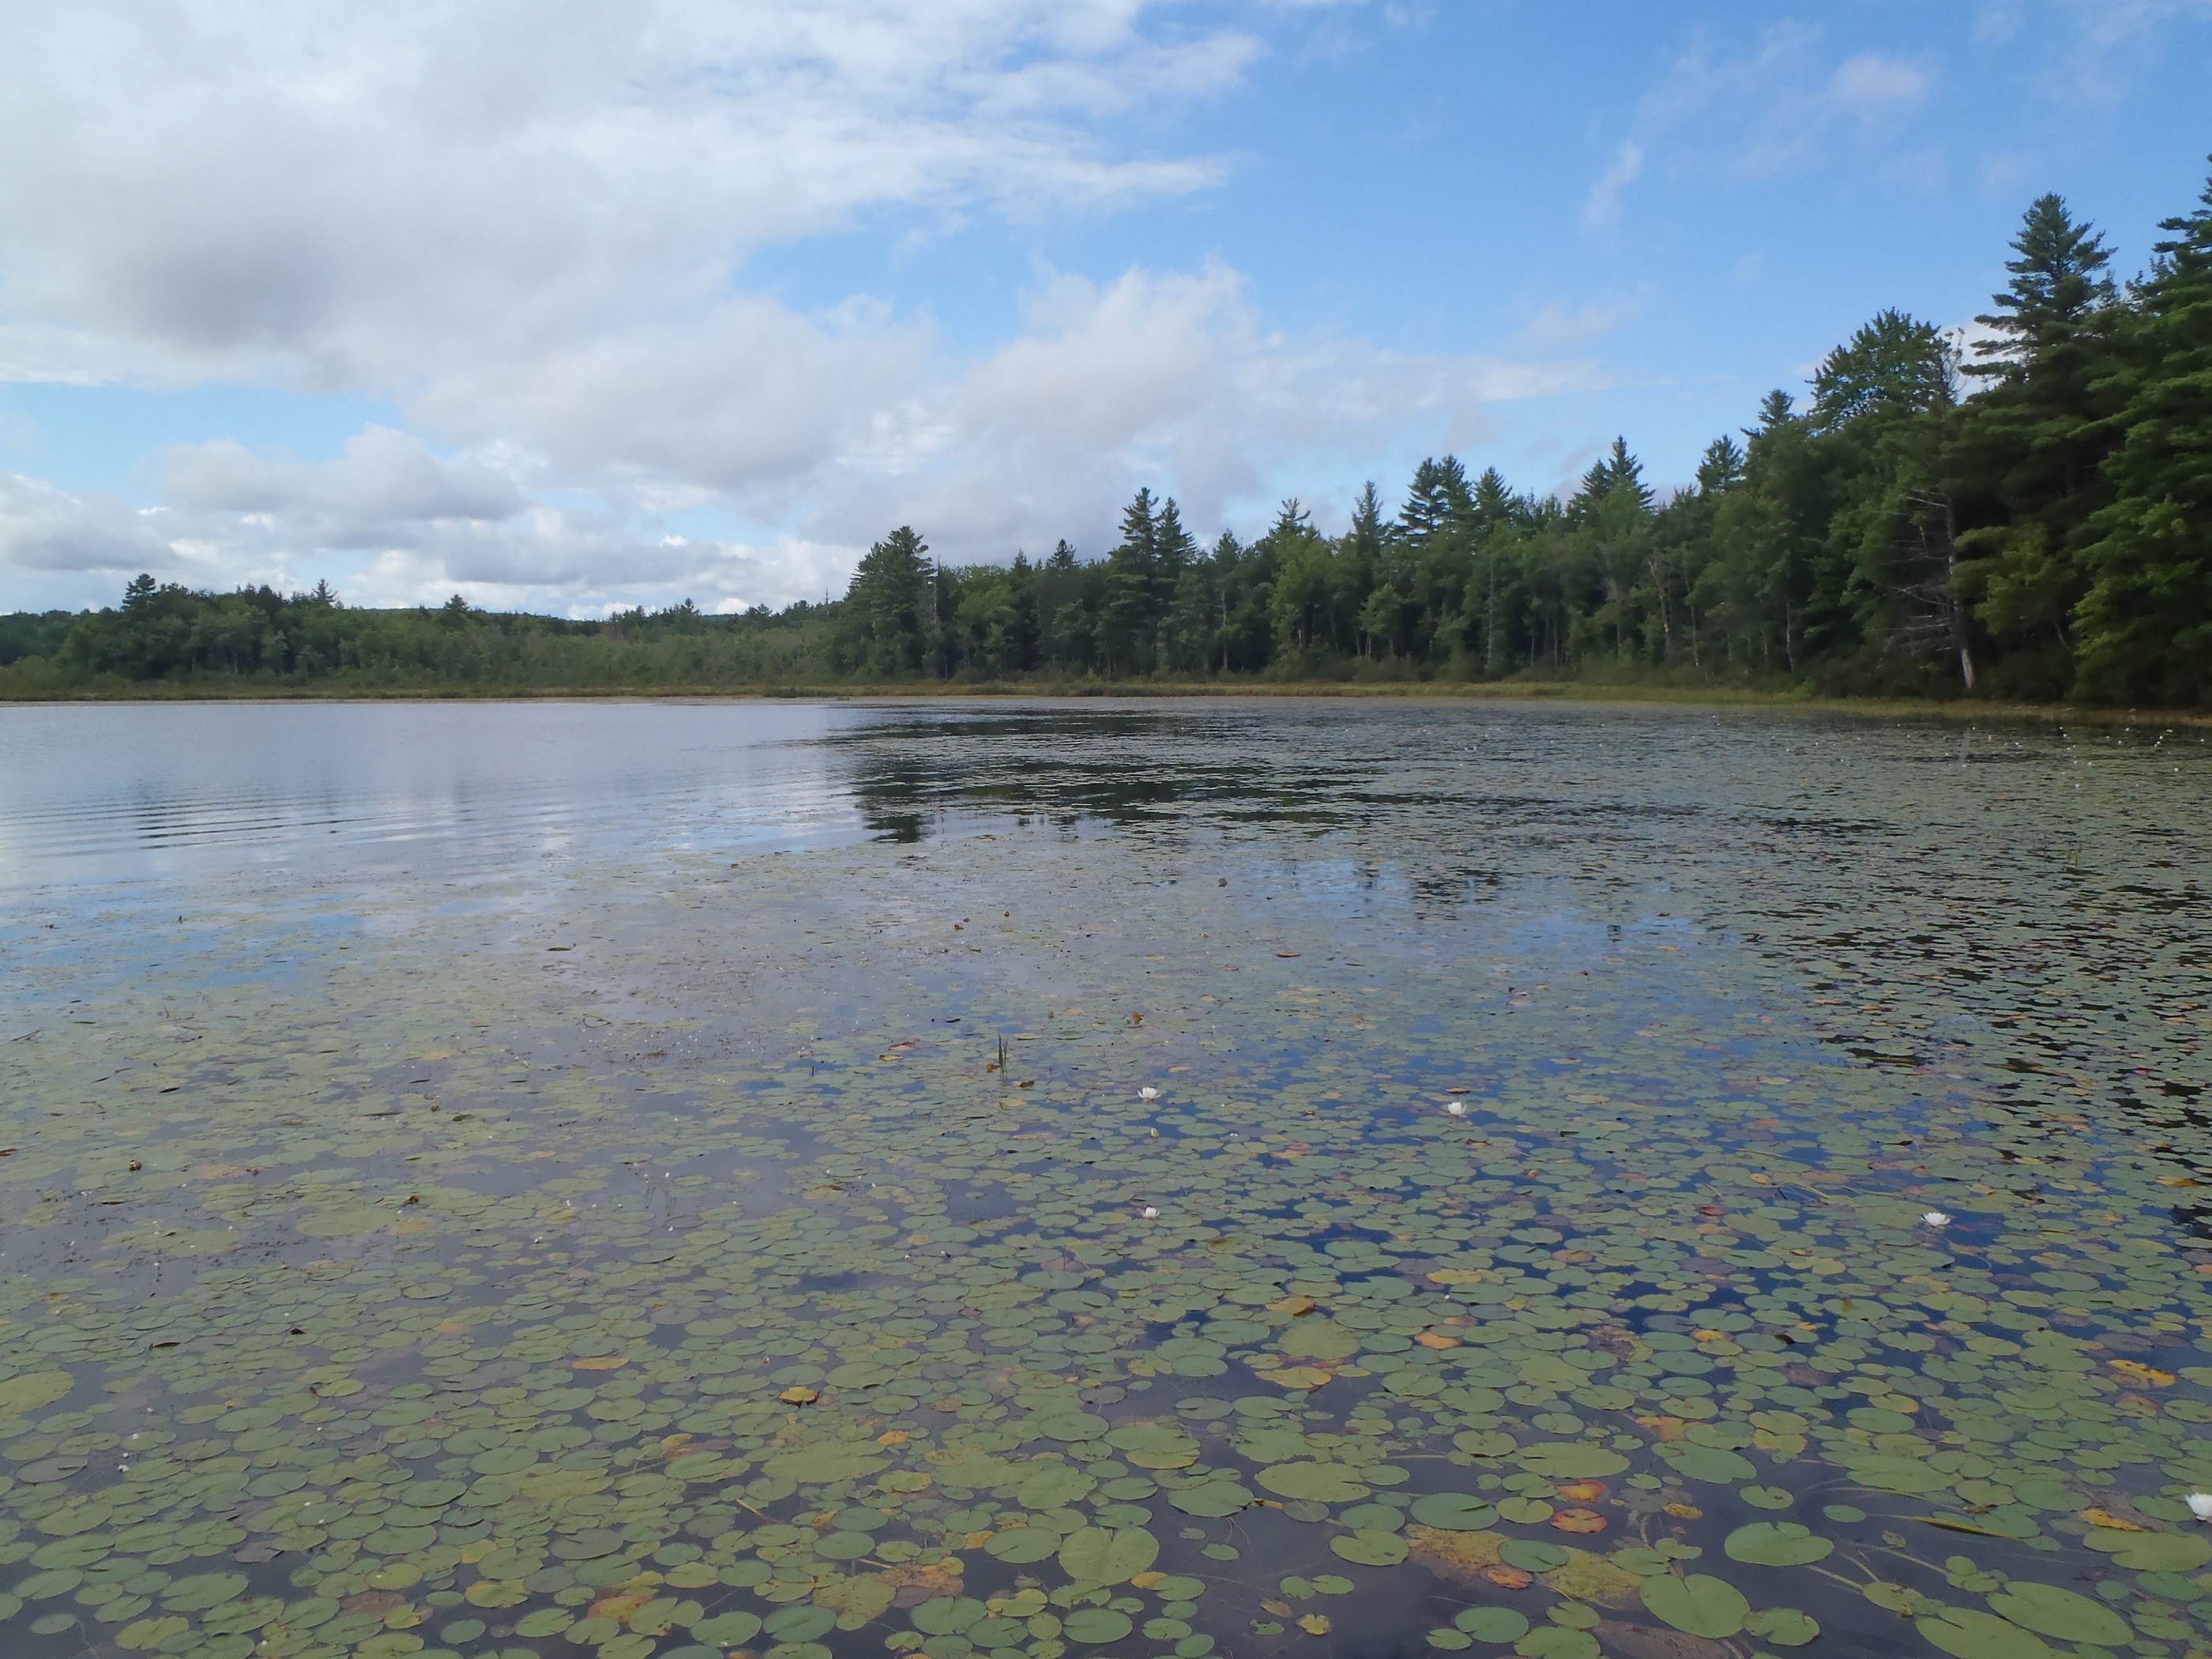 2800x2100 Acres and acres of lilypads on Holt Pond